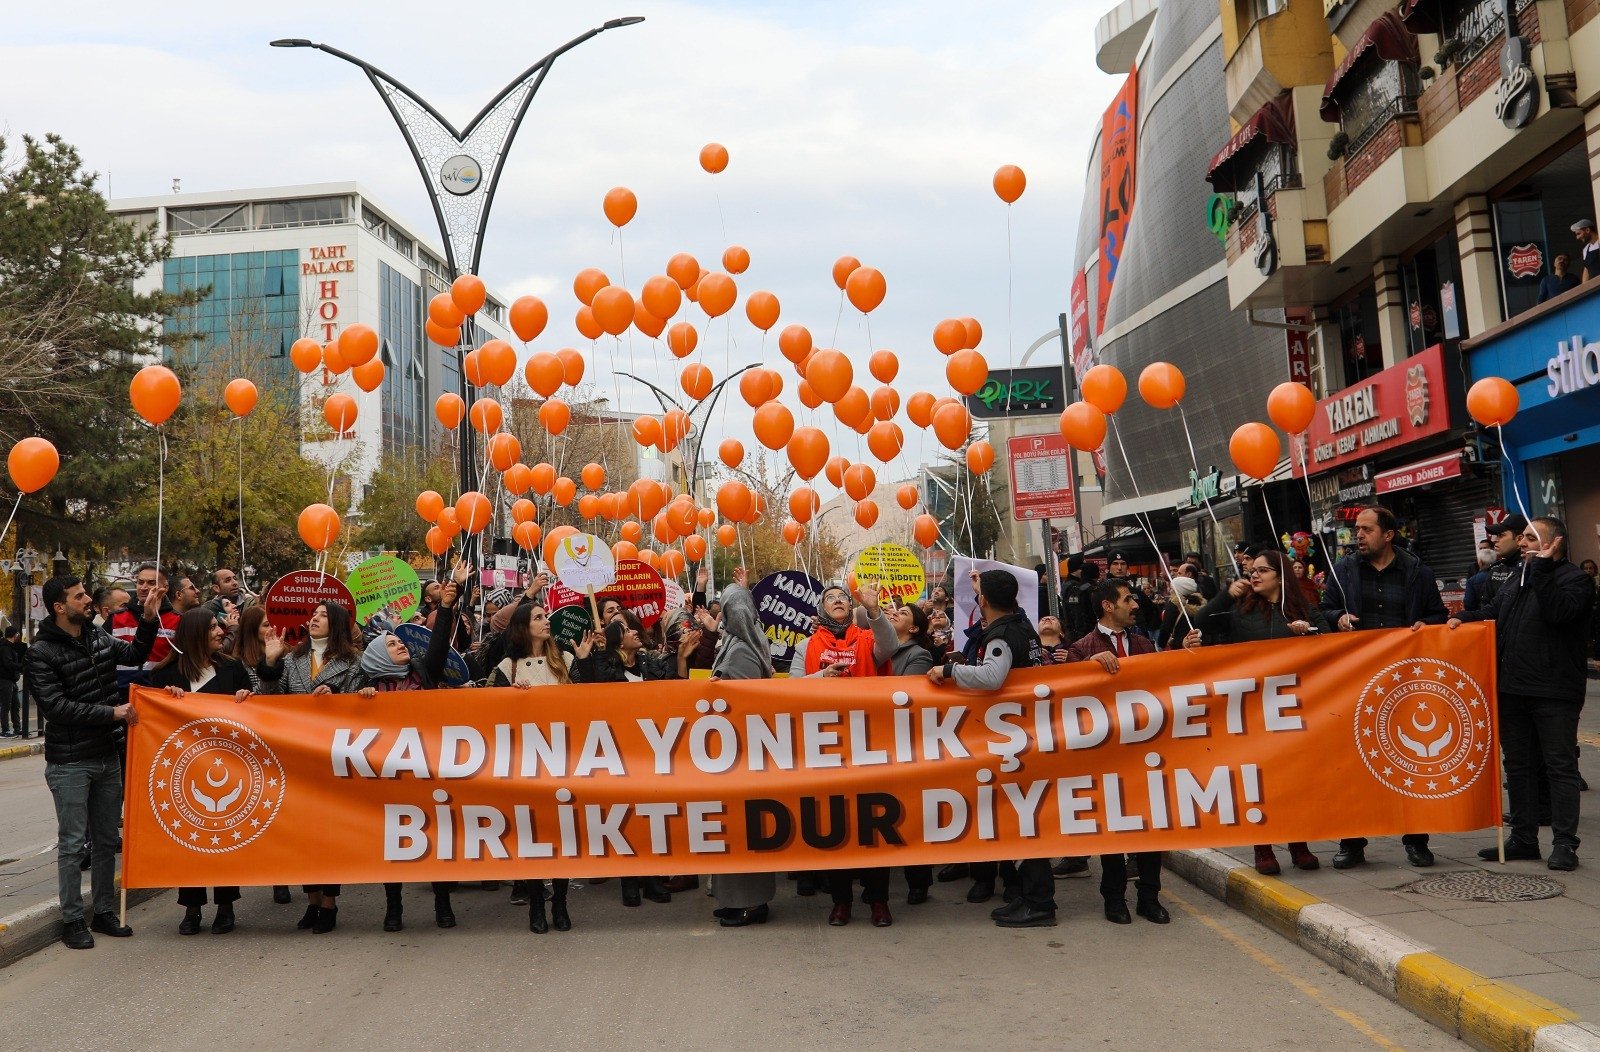 Women carry a banner with a slogan against violence targeting women and release orange balloons symbolizing the day, in Van, eastern Türkiye, Nov. 25, 2022. (İHA Photo) 